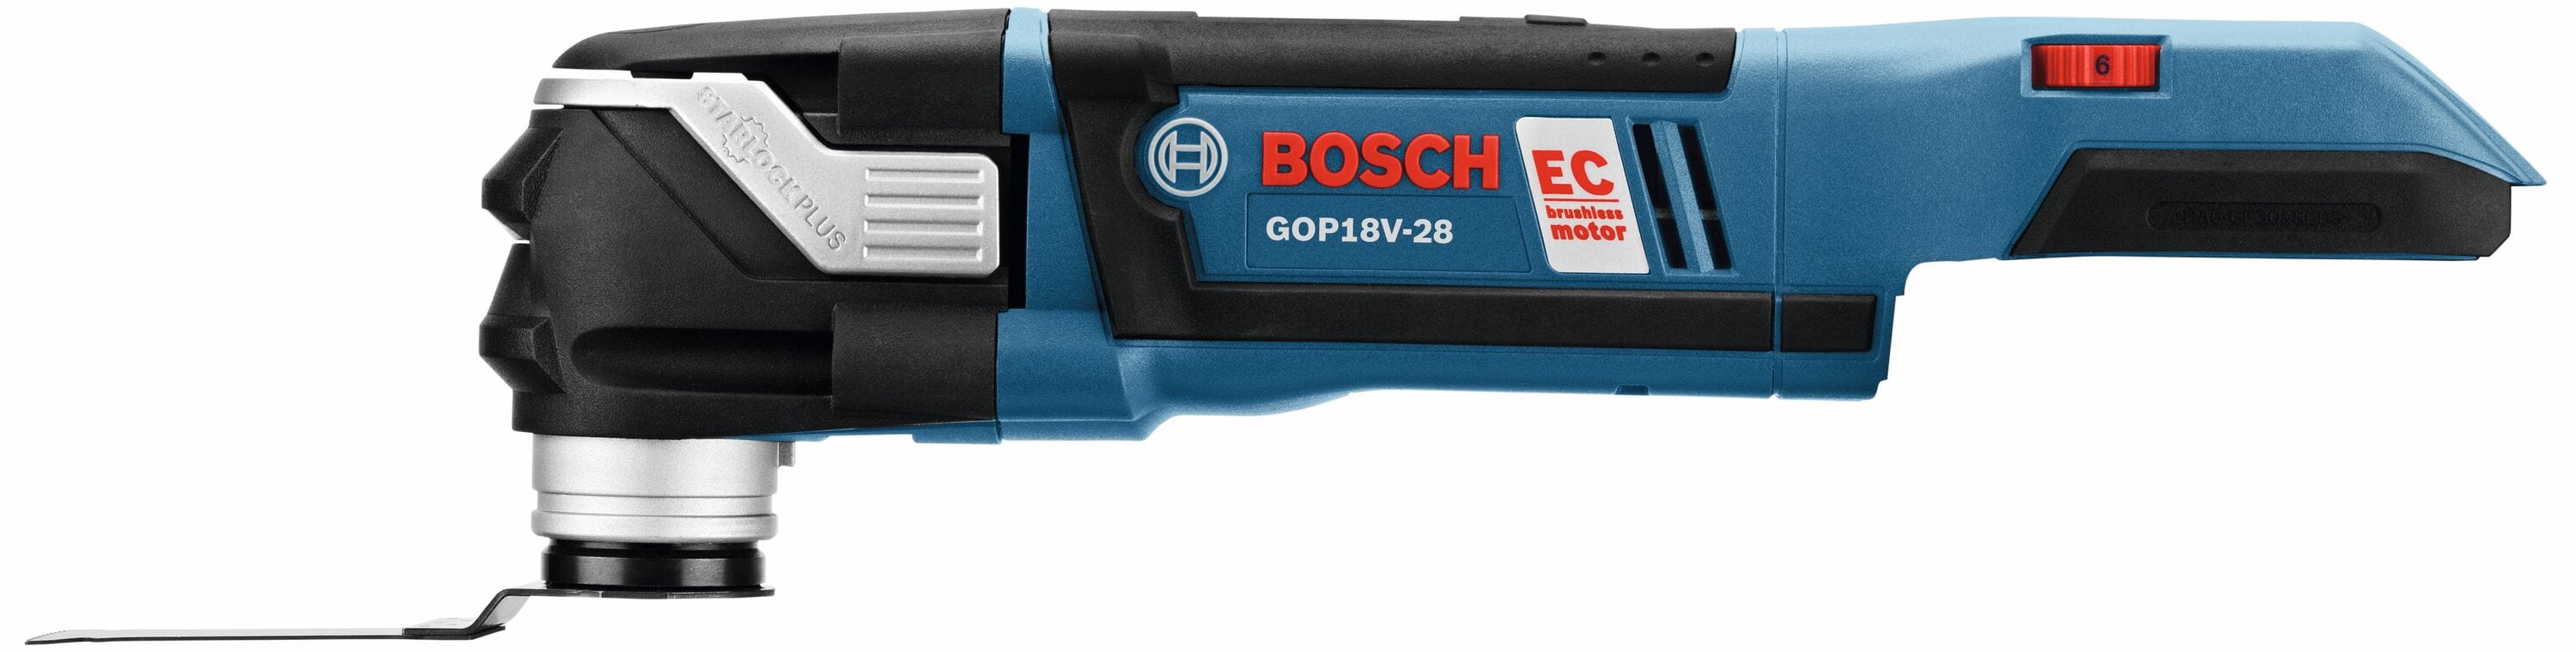 Bosch StarlockPlus Cordless Brushless Variable Multi-Tool in department Tool Oscillating 18-volt Speed Kits Oscillating at the